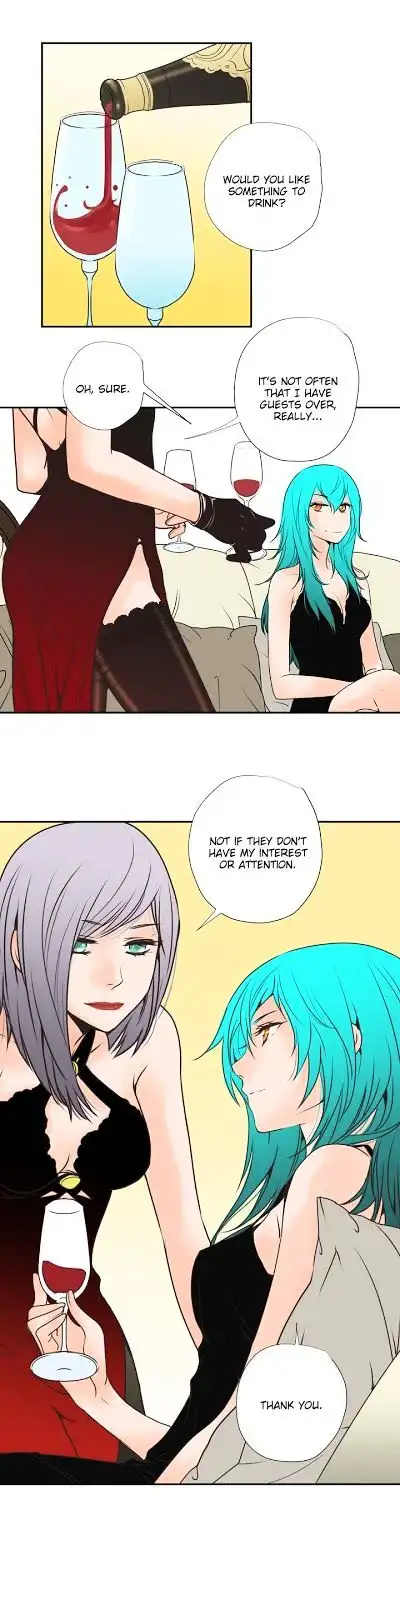 Pulse - Chapter 39 Page 4